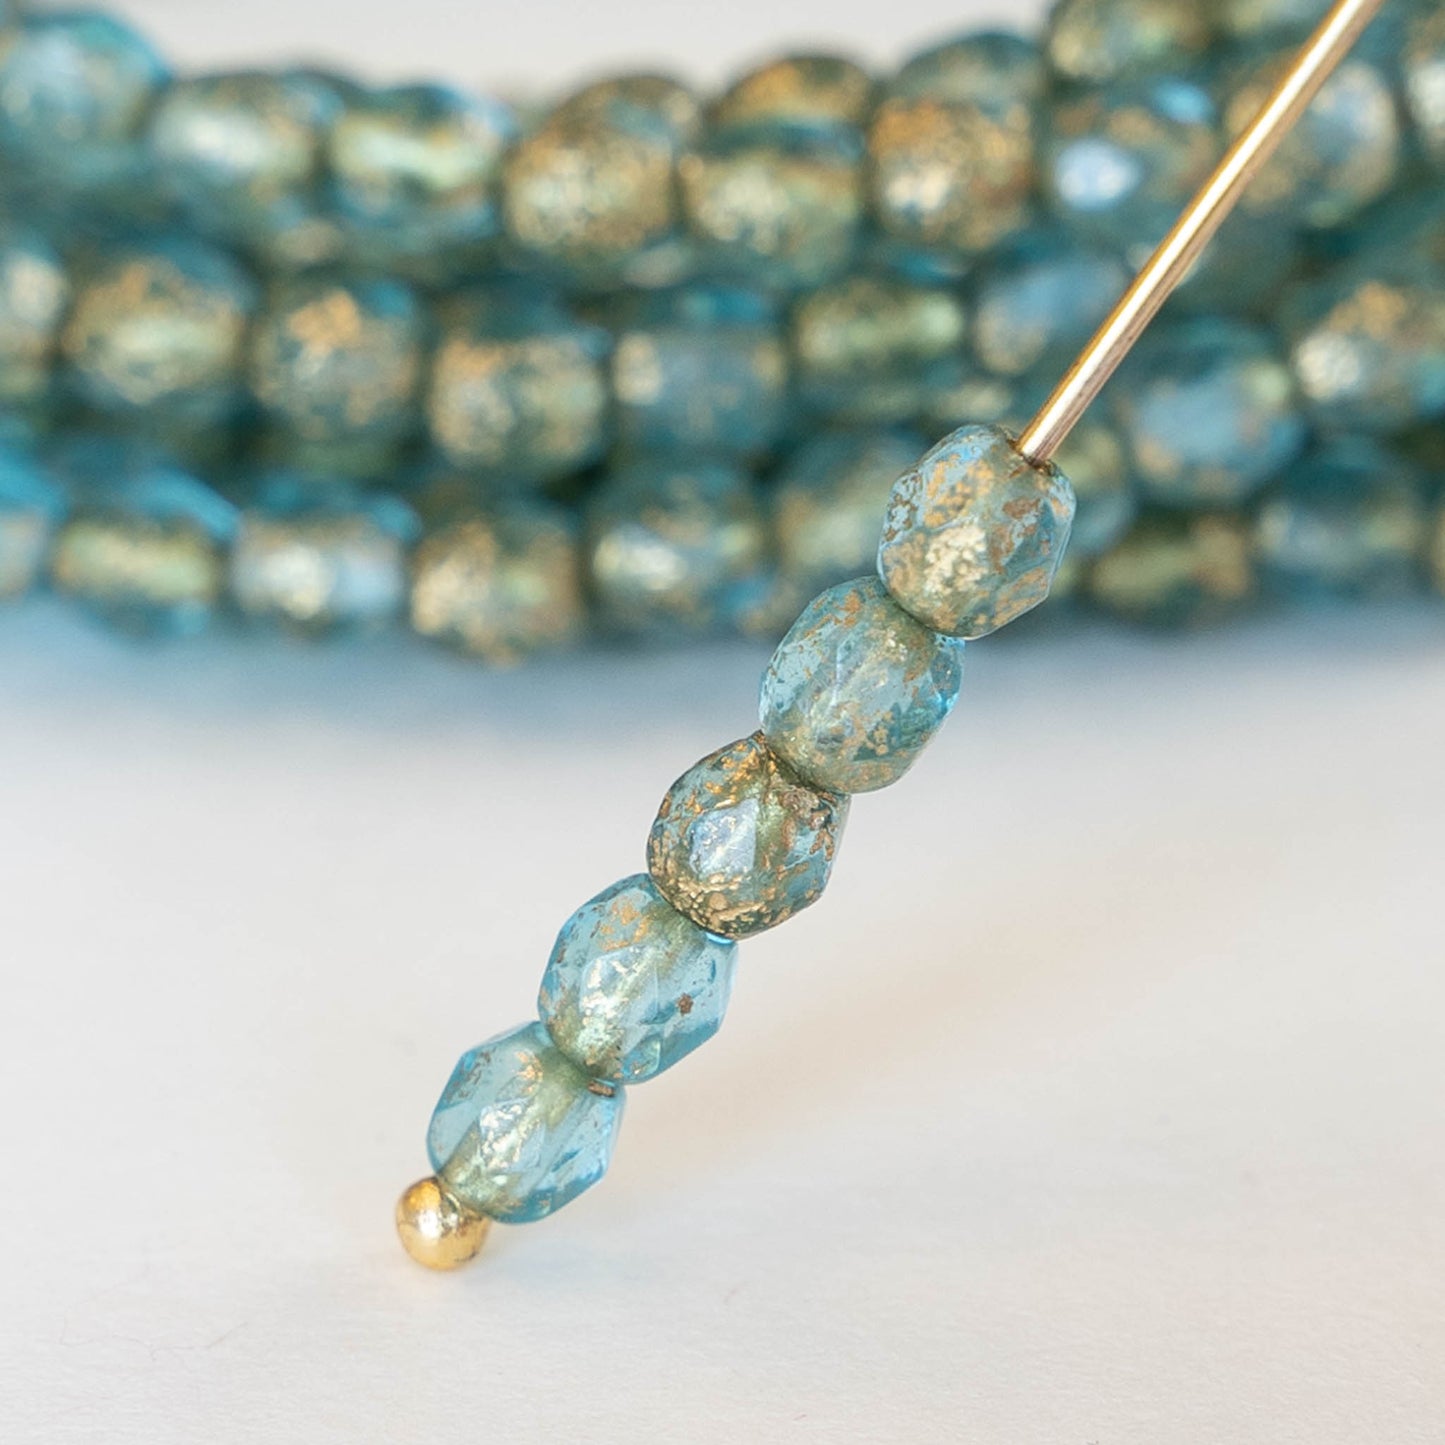 Load image into Gallery viewer, 4mm Round Firepolished Beads - Etched Aqua with Gold Dust - 50 Beads
